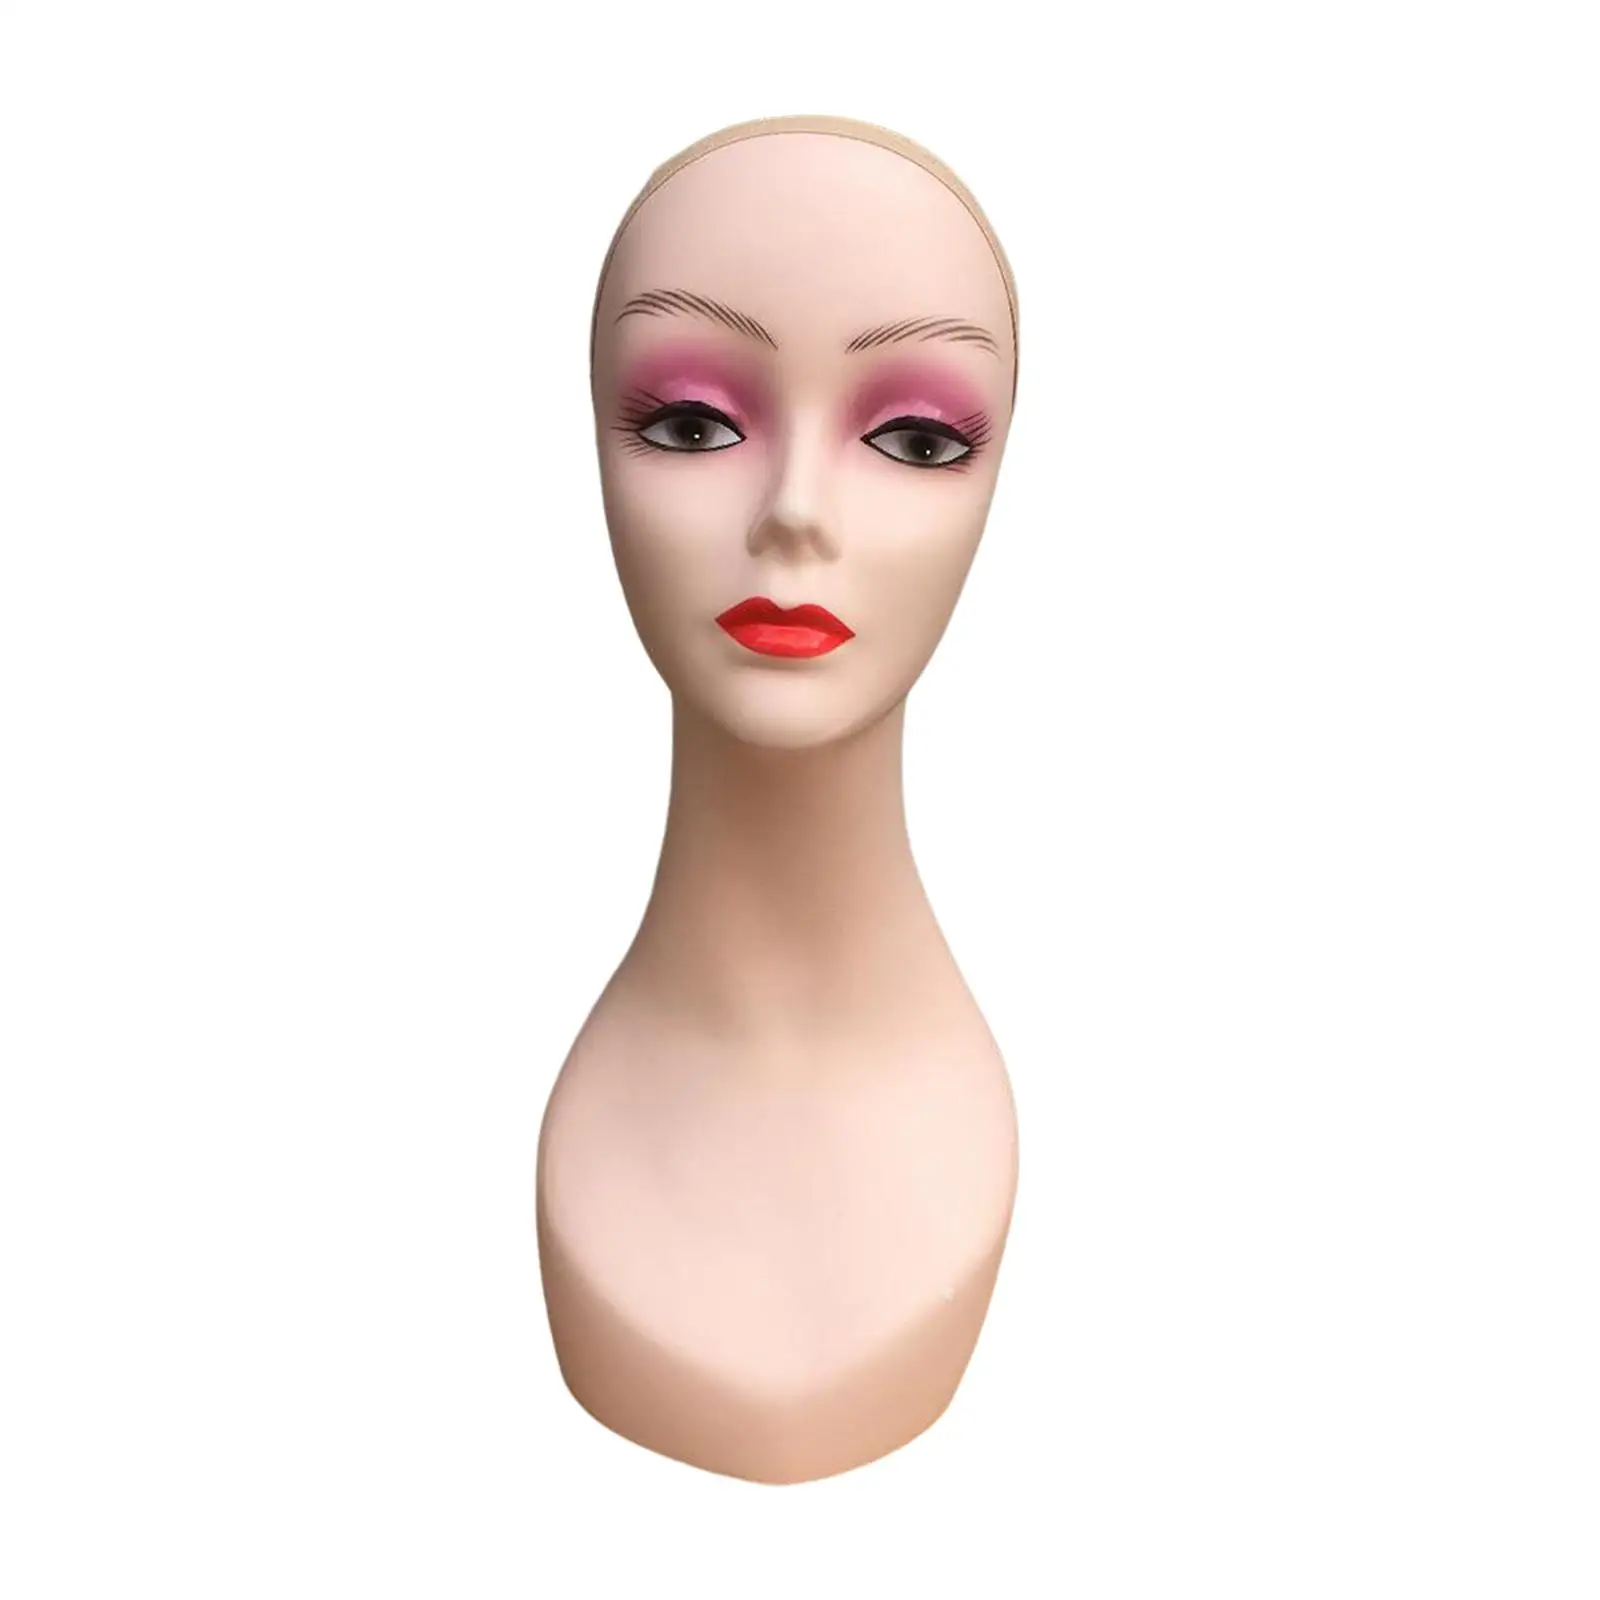 Women Wig Head Mannequin 18.90inch Height Wig Display Stand for Headscarves Hats Glasses Wigs Displaying Necklaces Jewelry